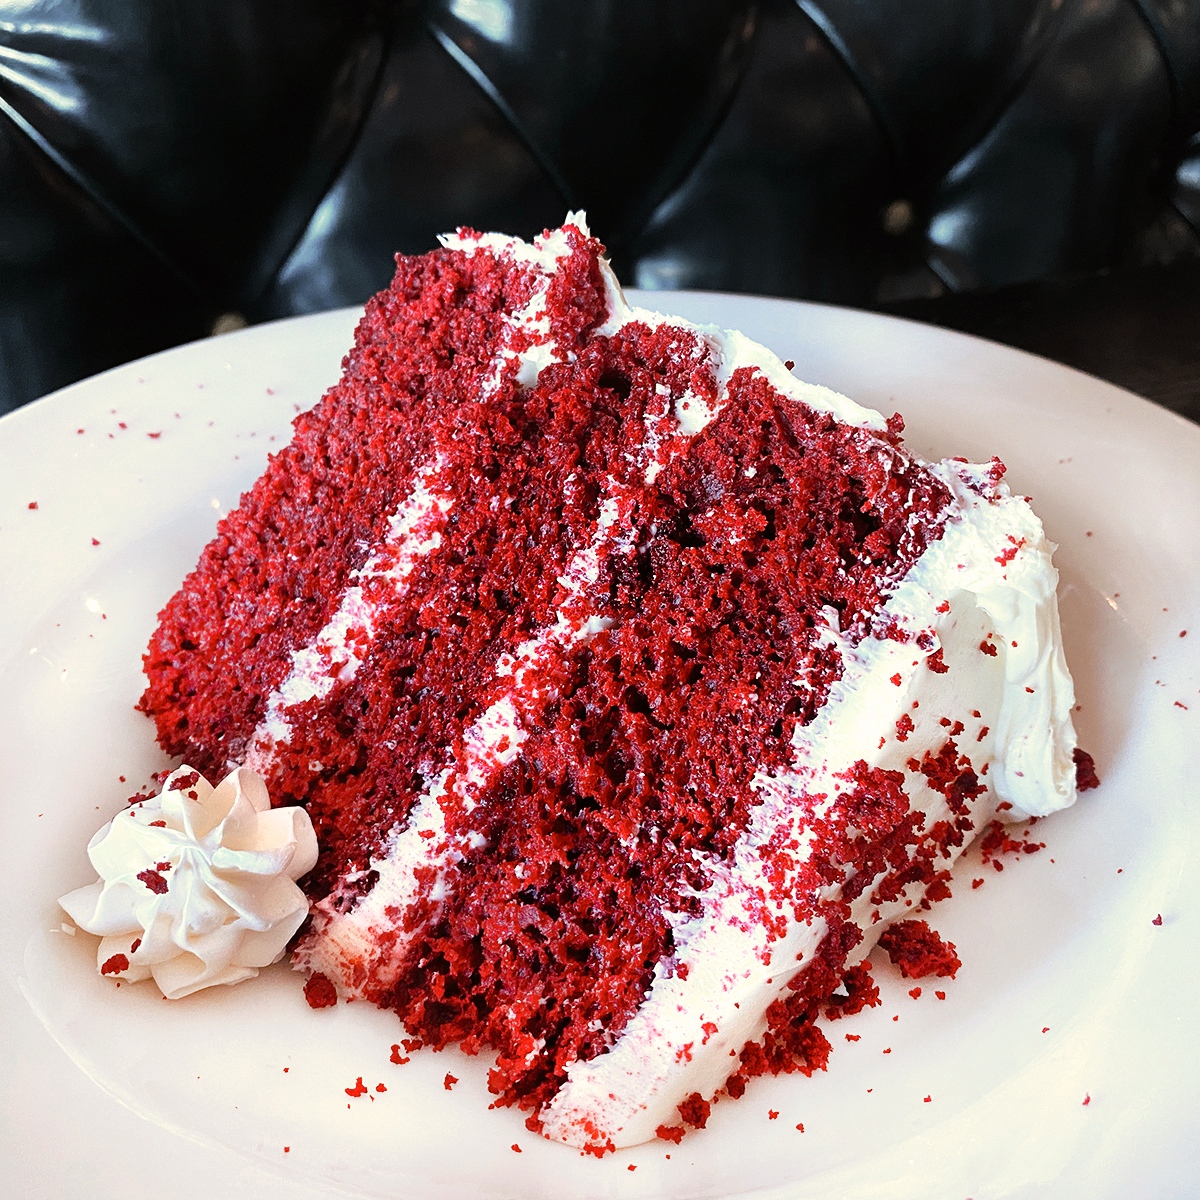 Sweet tooth acting up? Mr. C’s homemade Red Velvet Cake is the remedy. ❤️

👉🏼 Order Online at mrcsfcw.com.

#mrcsfriedchickenandwaffles #cake #redvelvet #comfortfood #safoodie #safood #satxfood #sanantoniofood #safoodpics #eatlocalsa #sanantonioeats